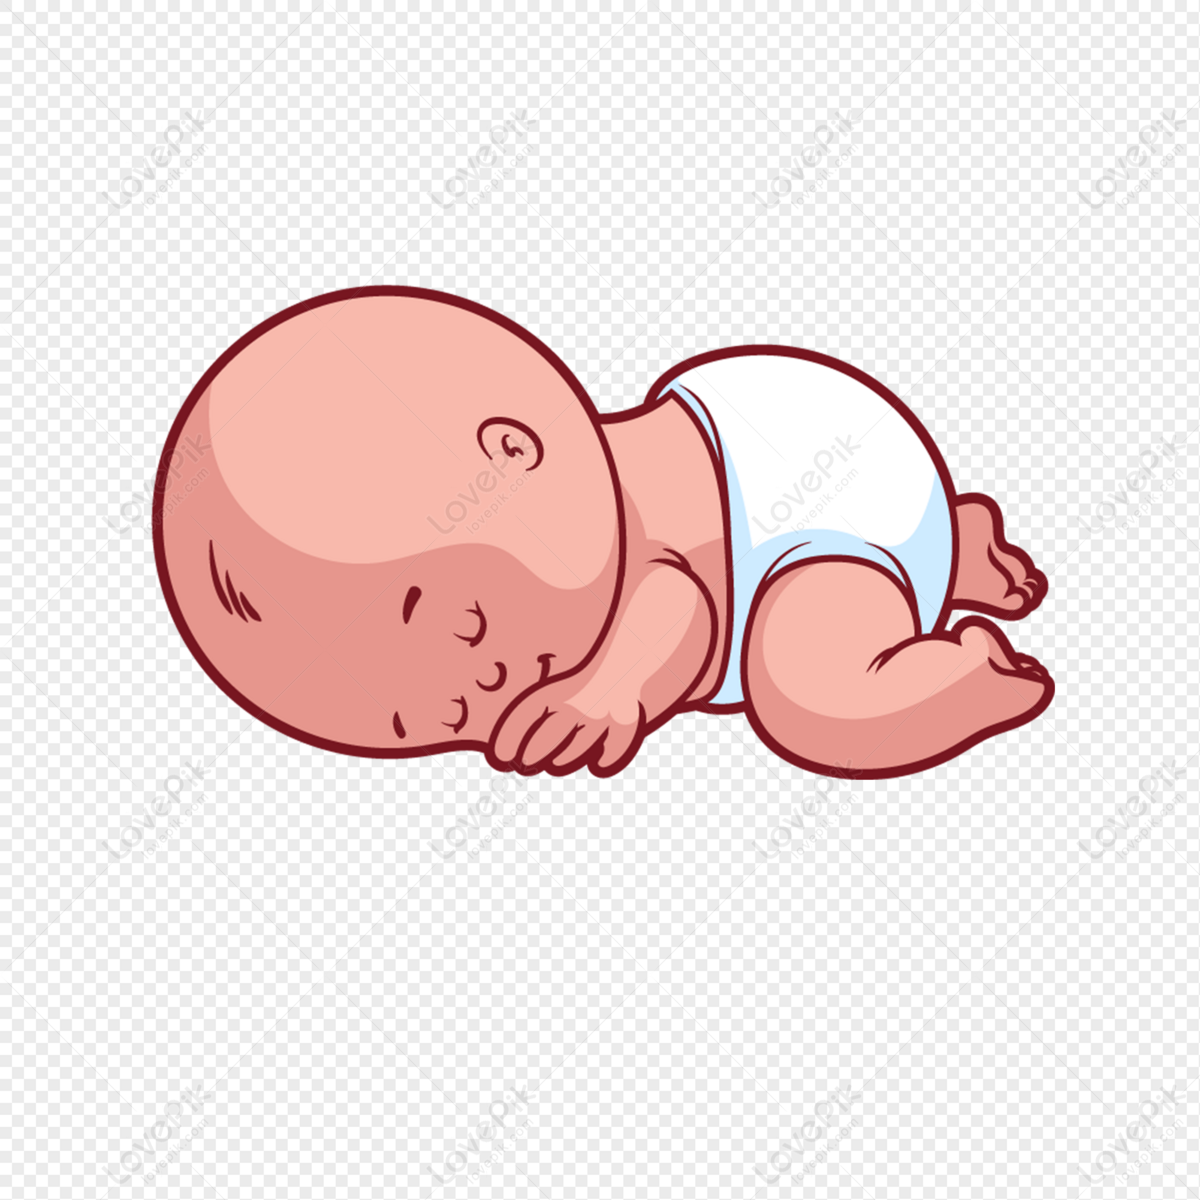 Character Baby Sleeping PNG Image Free Download And Clipart Image For Free  Download - Lovepik | 401302501